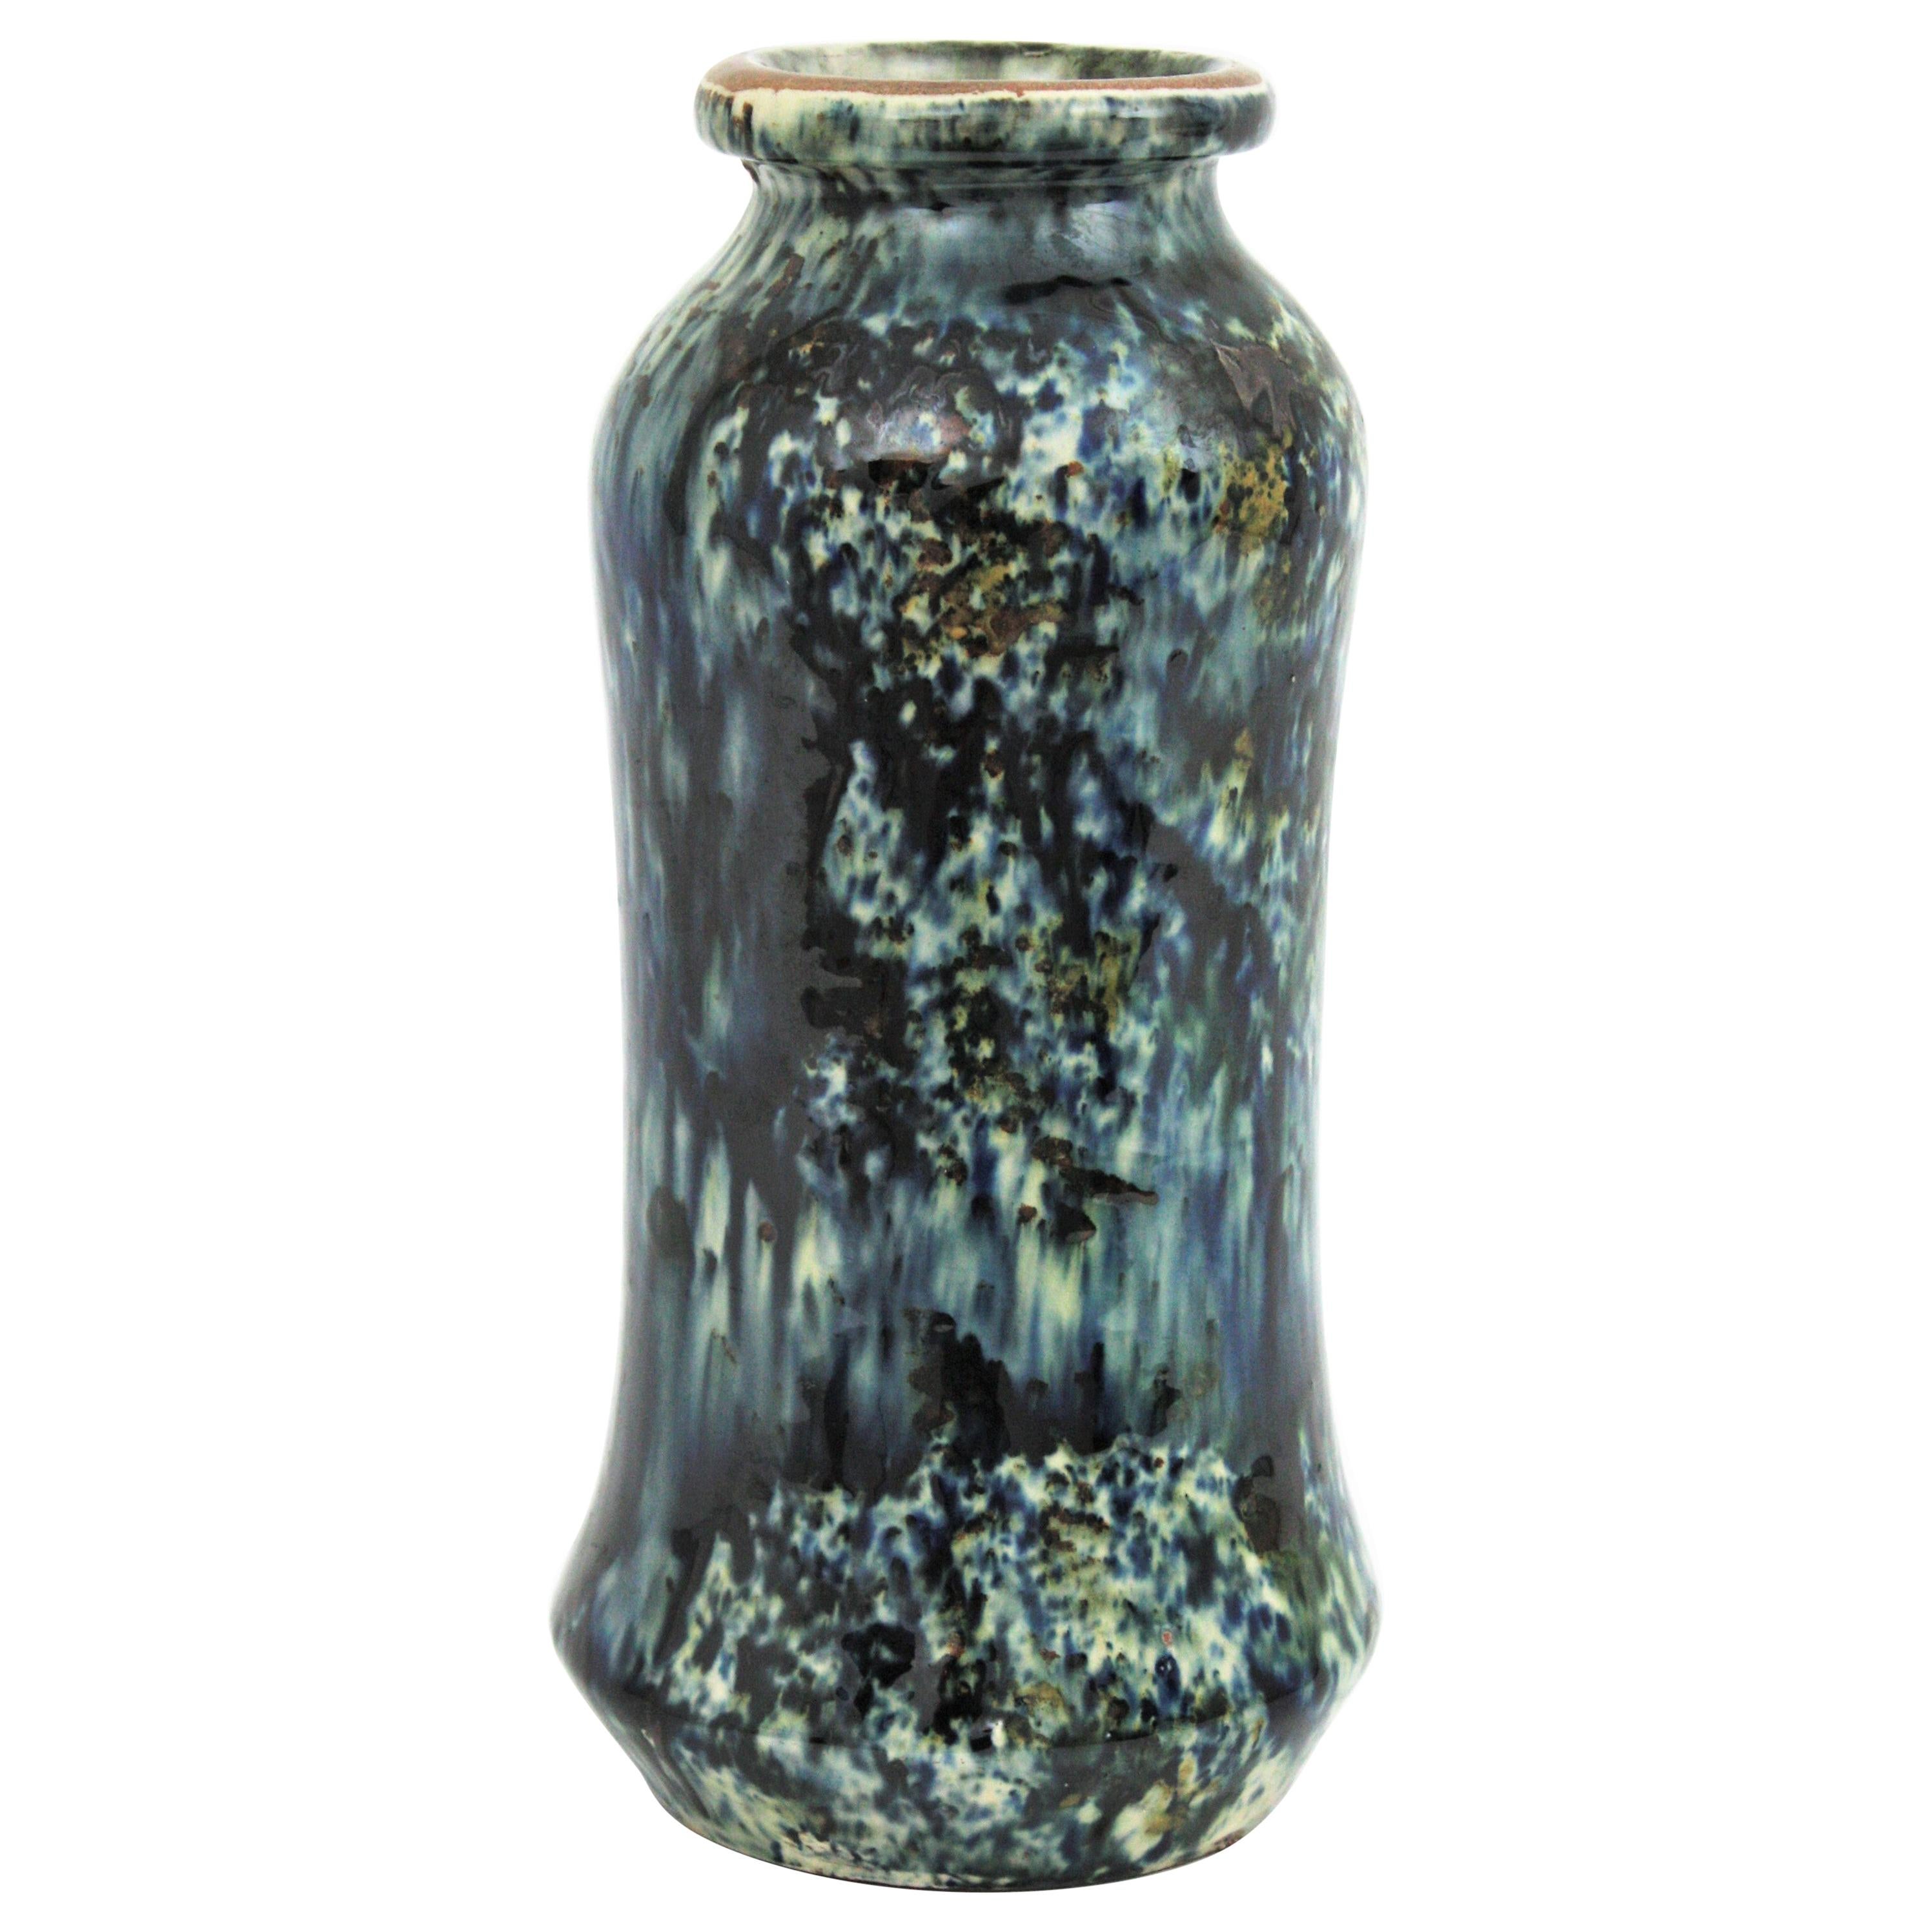 Spanish glazed terracotta spotted vase, Spain, circa 1960s.
Marine blue, white, black.
It has a mark on the bottom (IOX).
Beautiful to be used as flower vase or to be exhibited as a part of a ceramics collection
Measures: 25 cm height x 12.5 cm